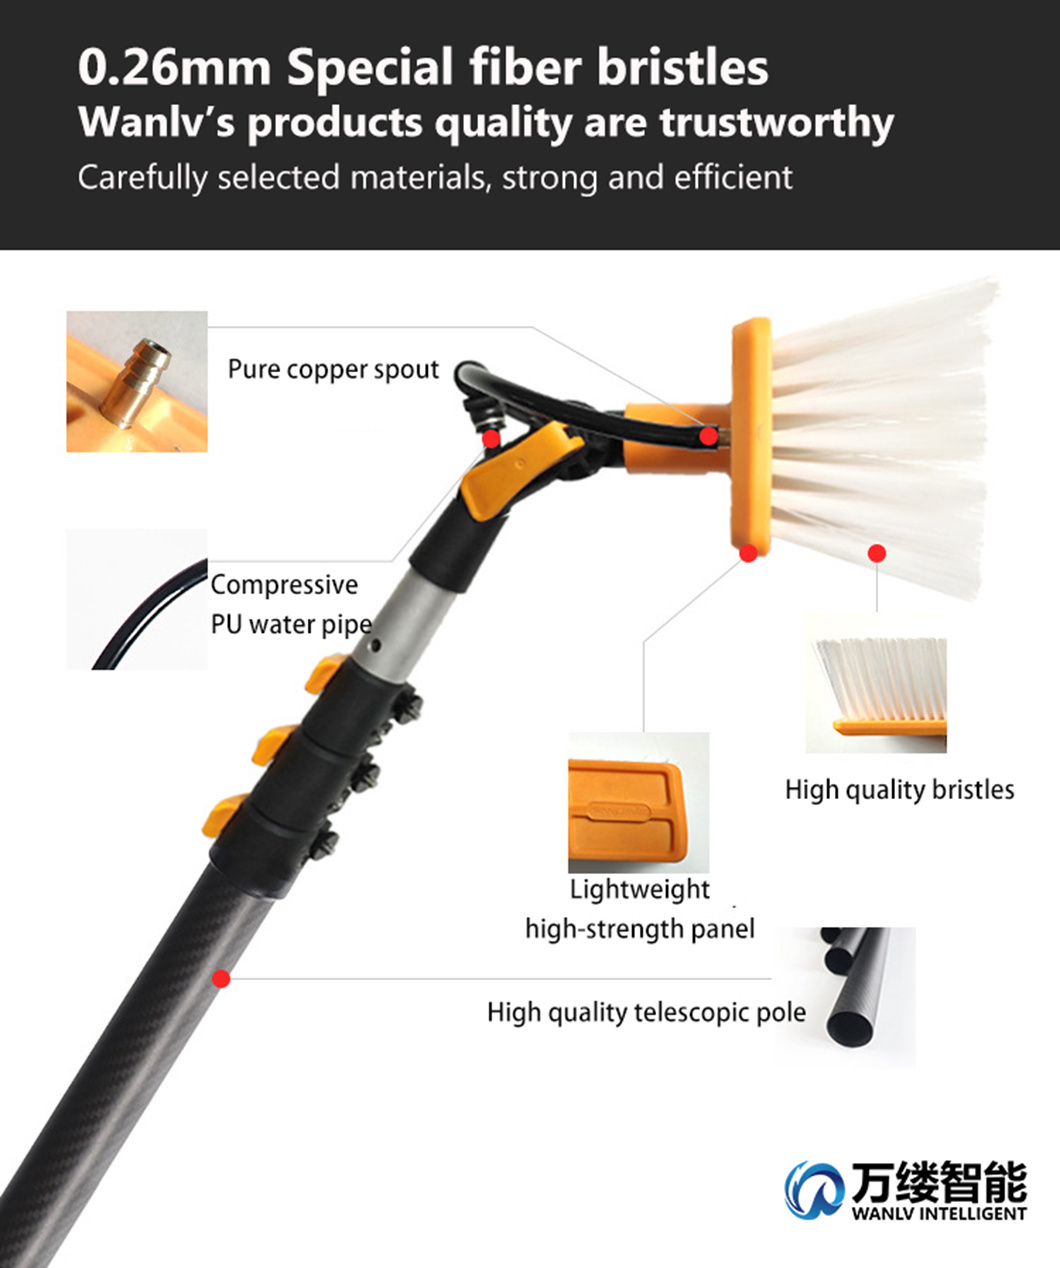 Wanlv Sunny Manufacture Solar Panel Cleaner Manual Spray Cleaning Brush with 55 Cm Wide Head 4.8 M Extended Water Fed Pole Connecting Tap or Pump